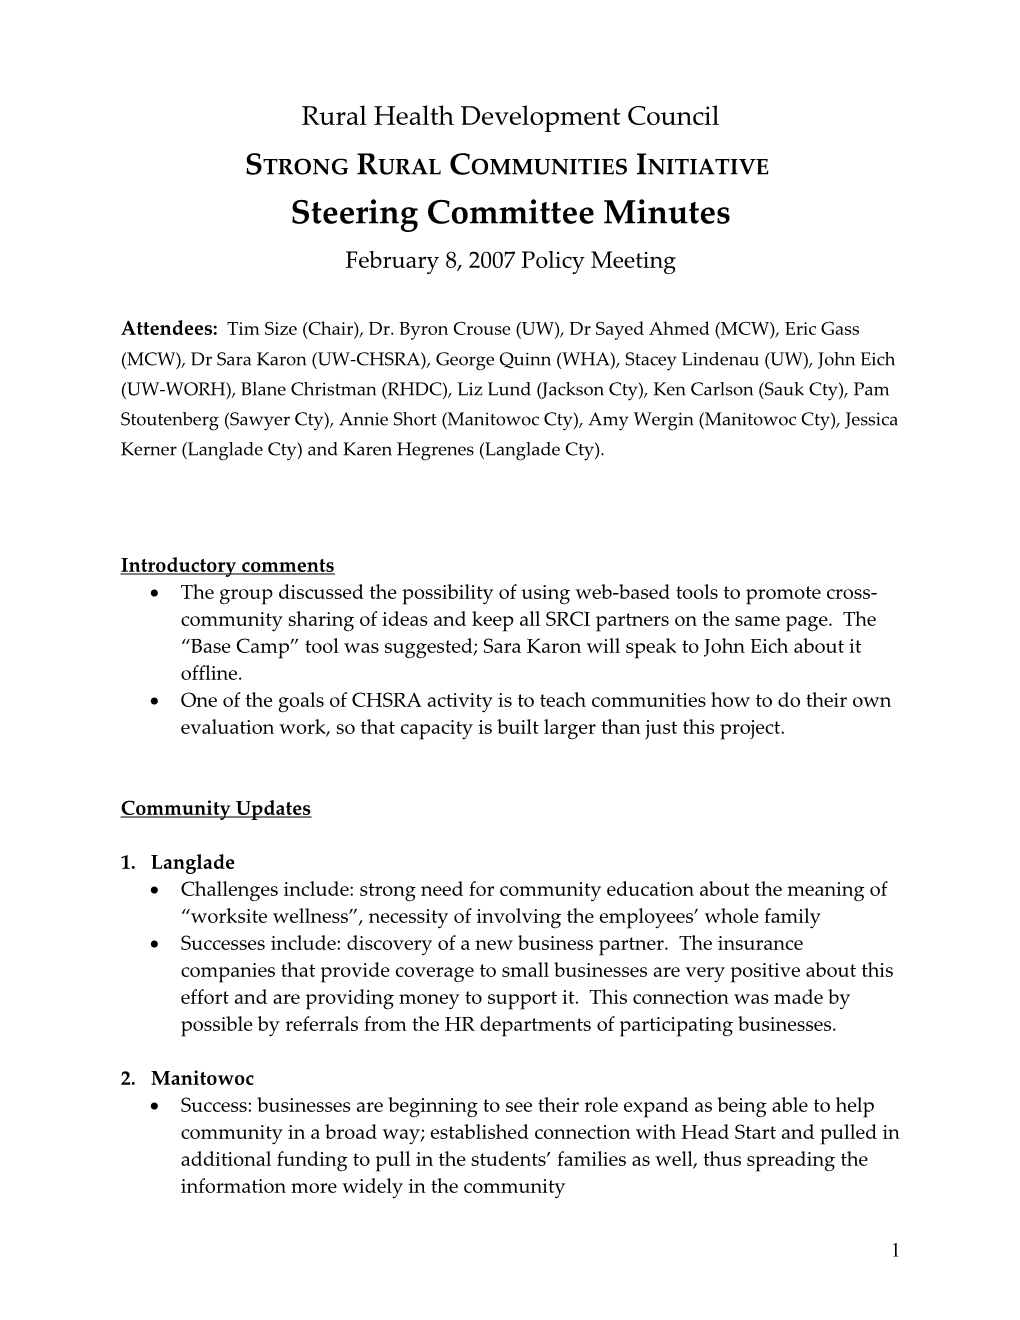 Notes from SRCI Policy Discussion 2/8